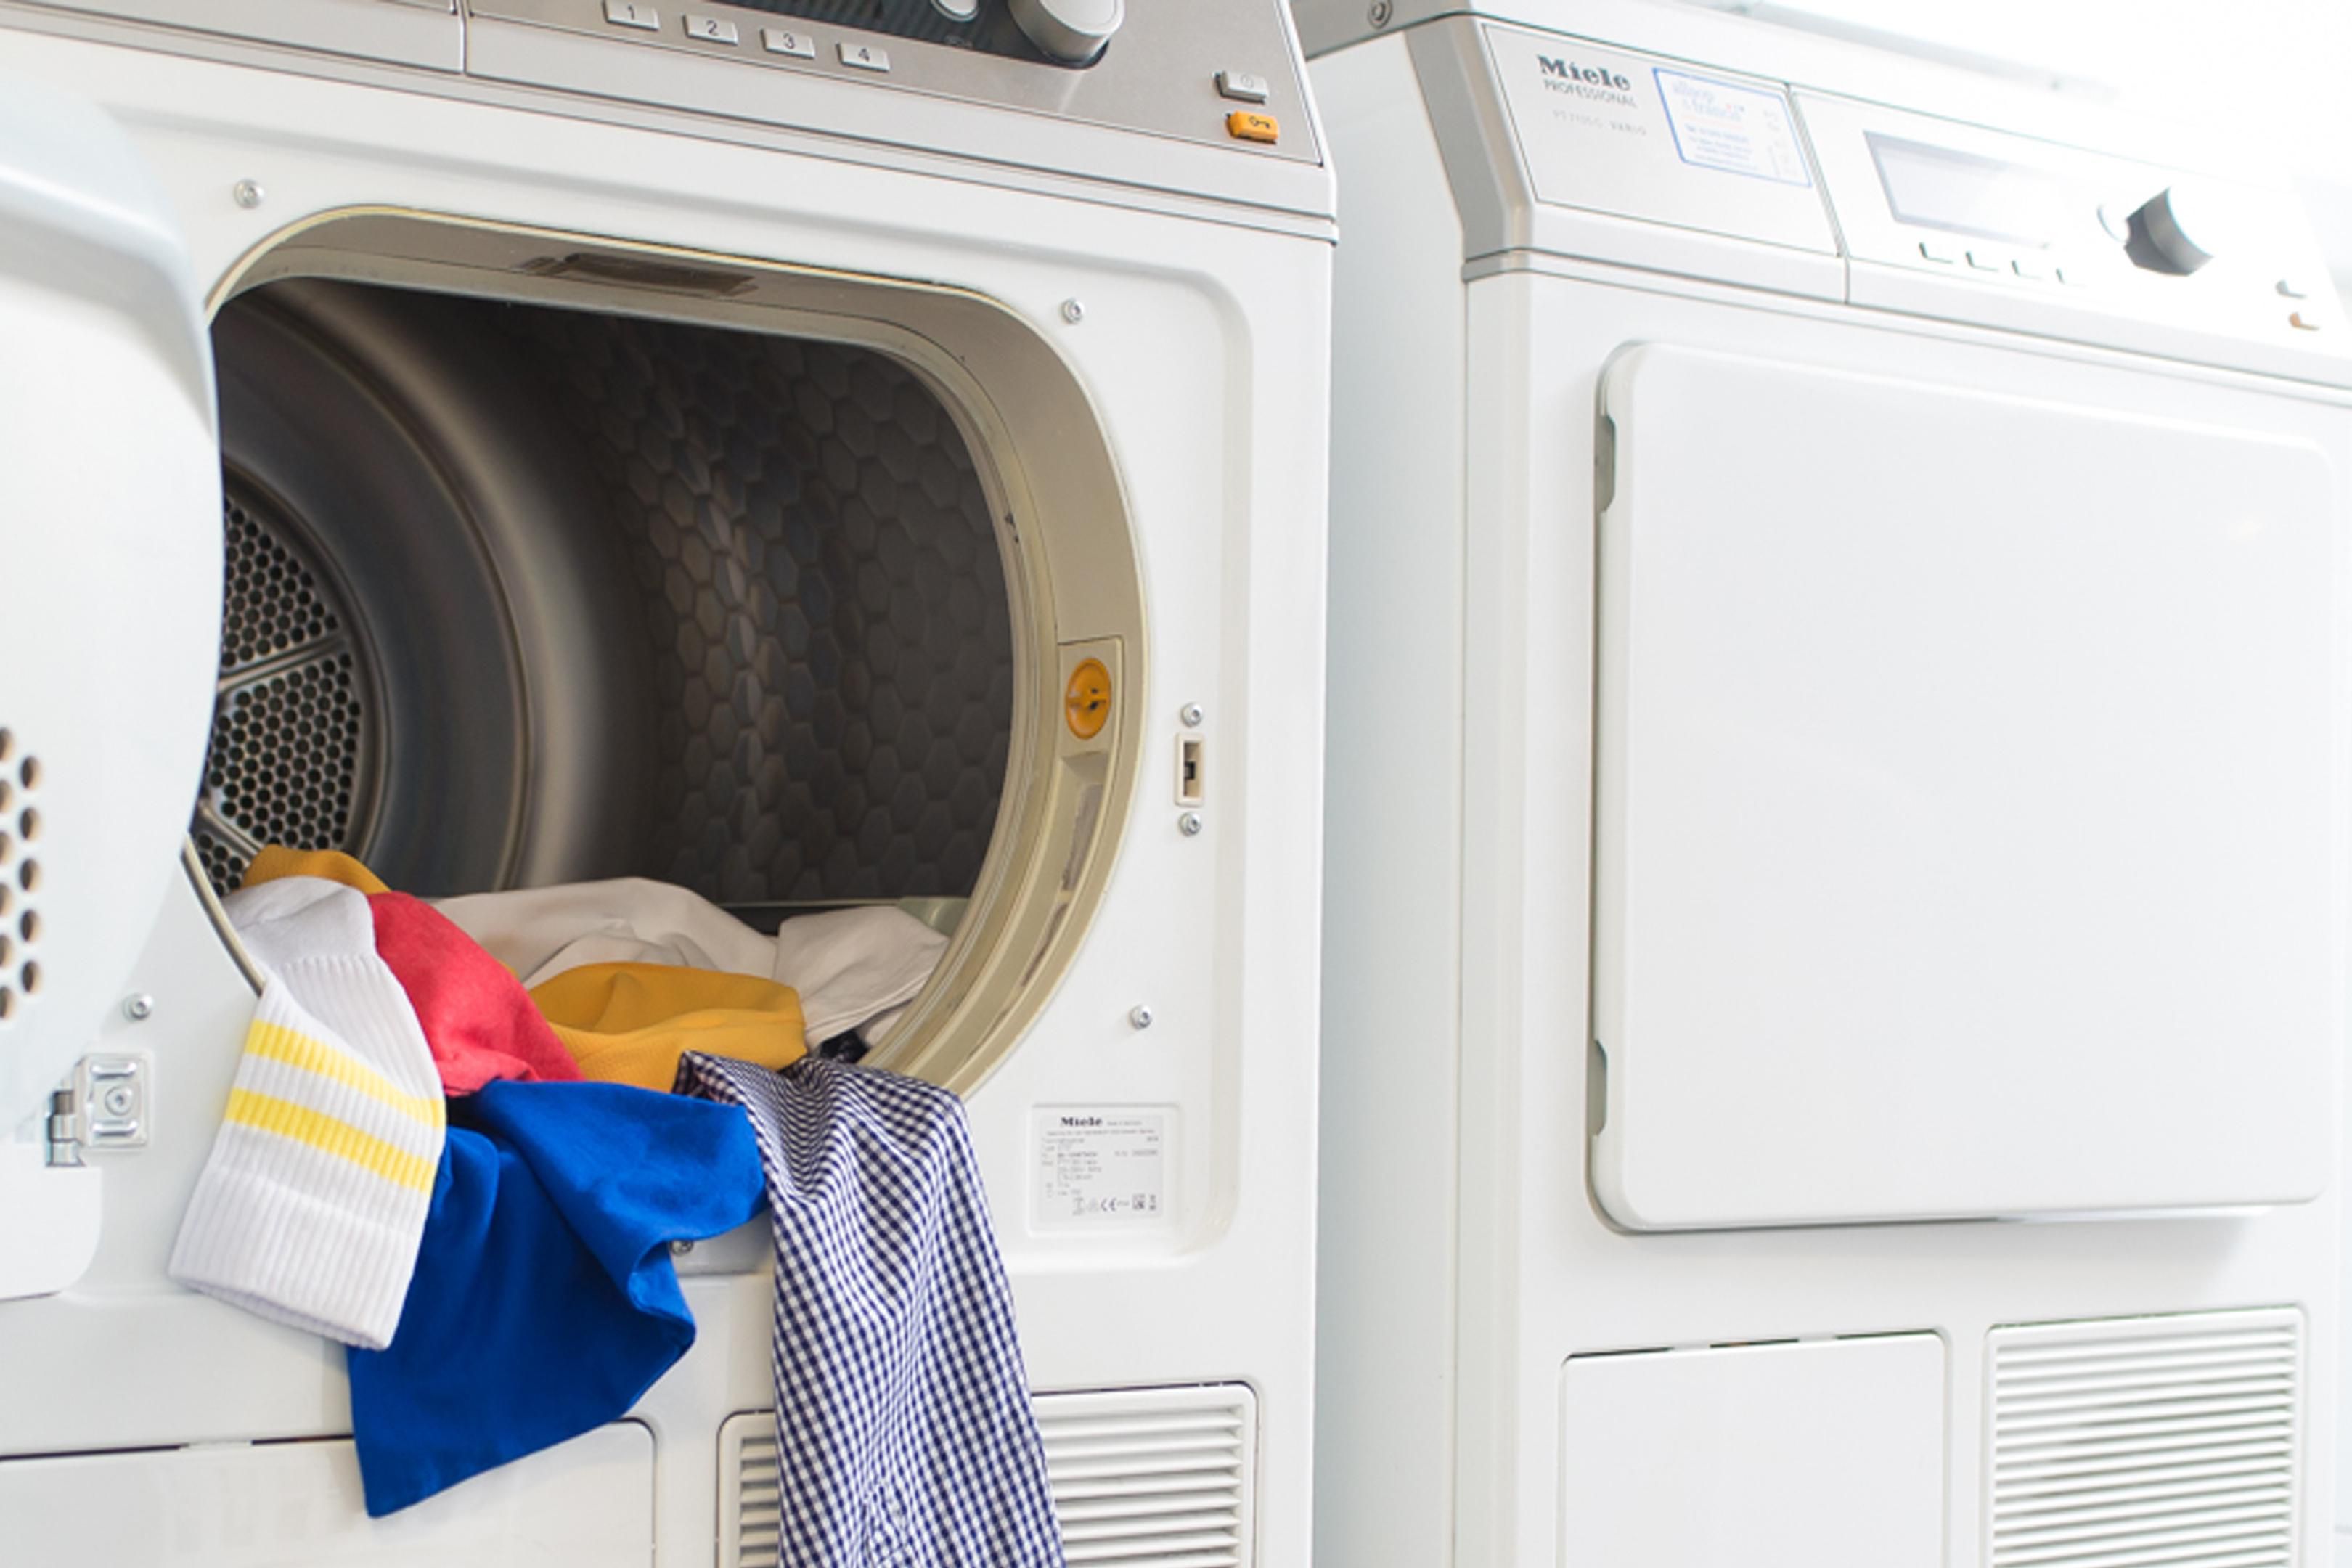 Finish your London trip as a winner, with a suitcase full of fresh cleaned clothes. 
Guests can use our laundry facilities free of charge during their stay. It's a win win situation.